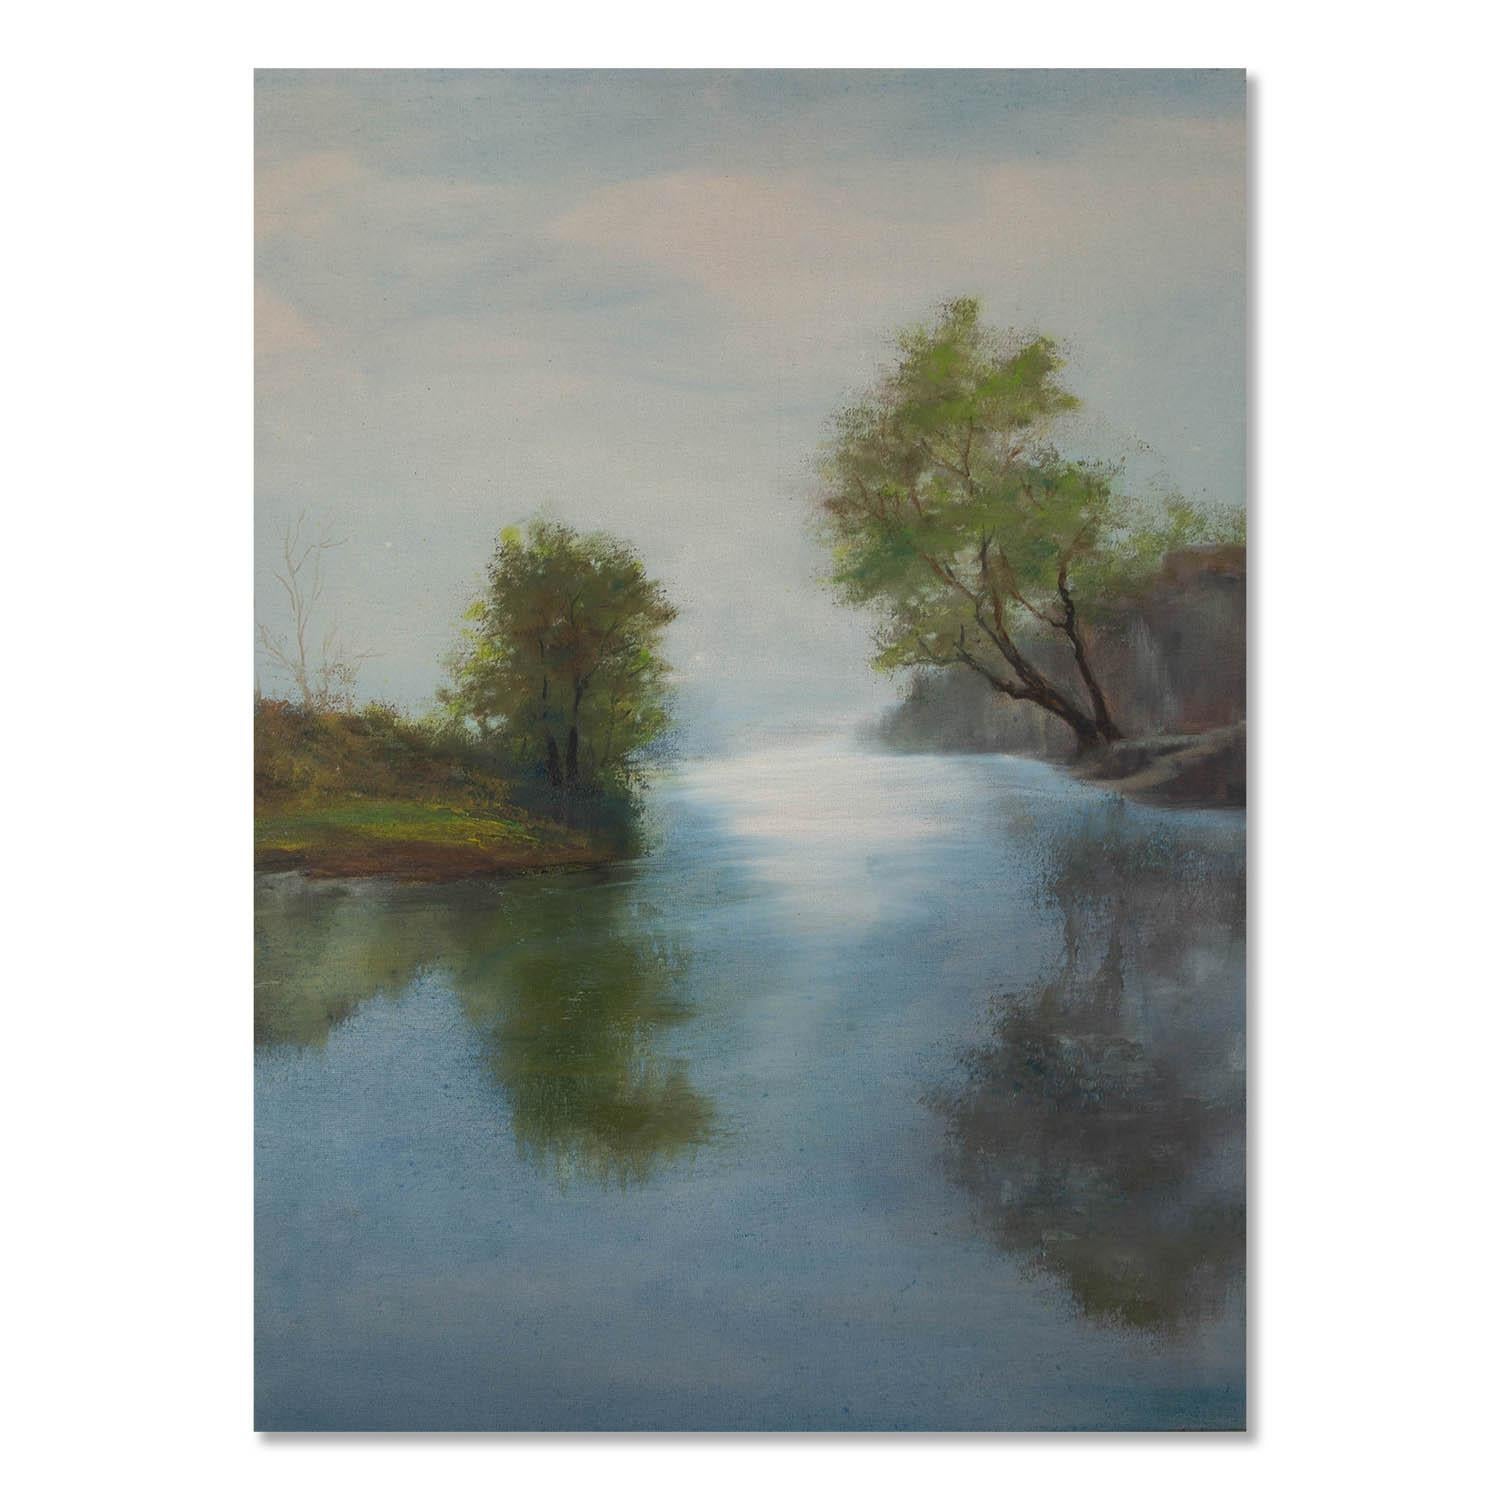  Title: Lake Reflection
 Medium: Oil on canvas
 Size: 30 x 22 inches
 Frame: Framing options available!
 Condition: The painting appears to be in excellent condition.
 
 Year: 2000 Circa
 Artist: Jianping Chen
 Signature: Signed
 Signature Location: